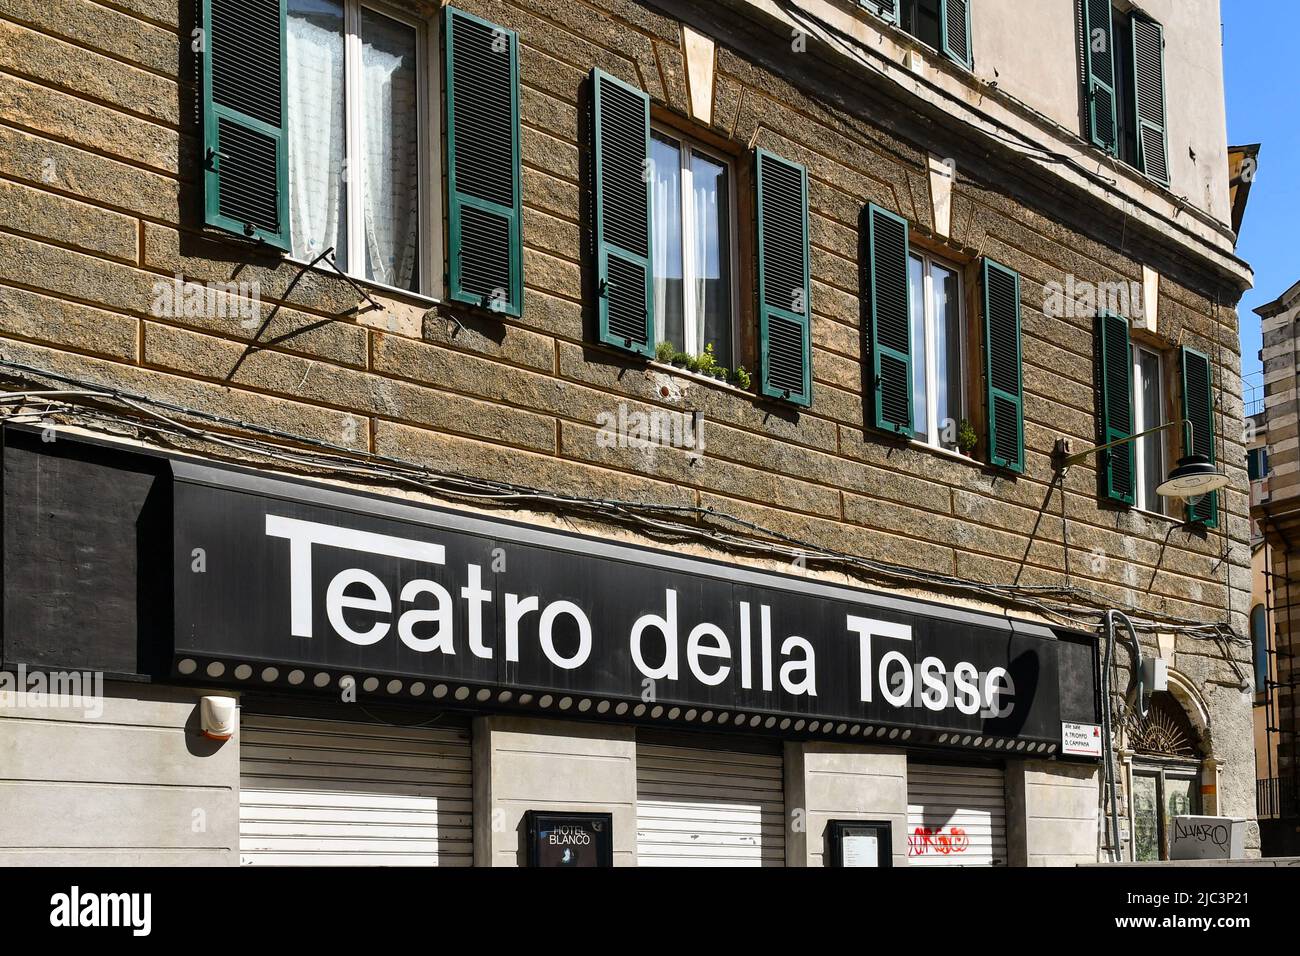 Exterior and sign of the Teatro della Tosse, theatre in the old town of Genoa, Liguria, Italy Stock Photo